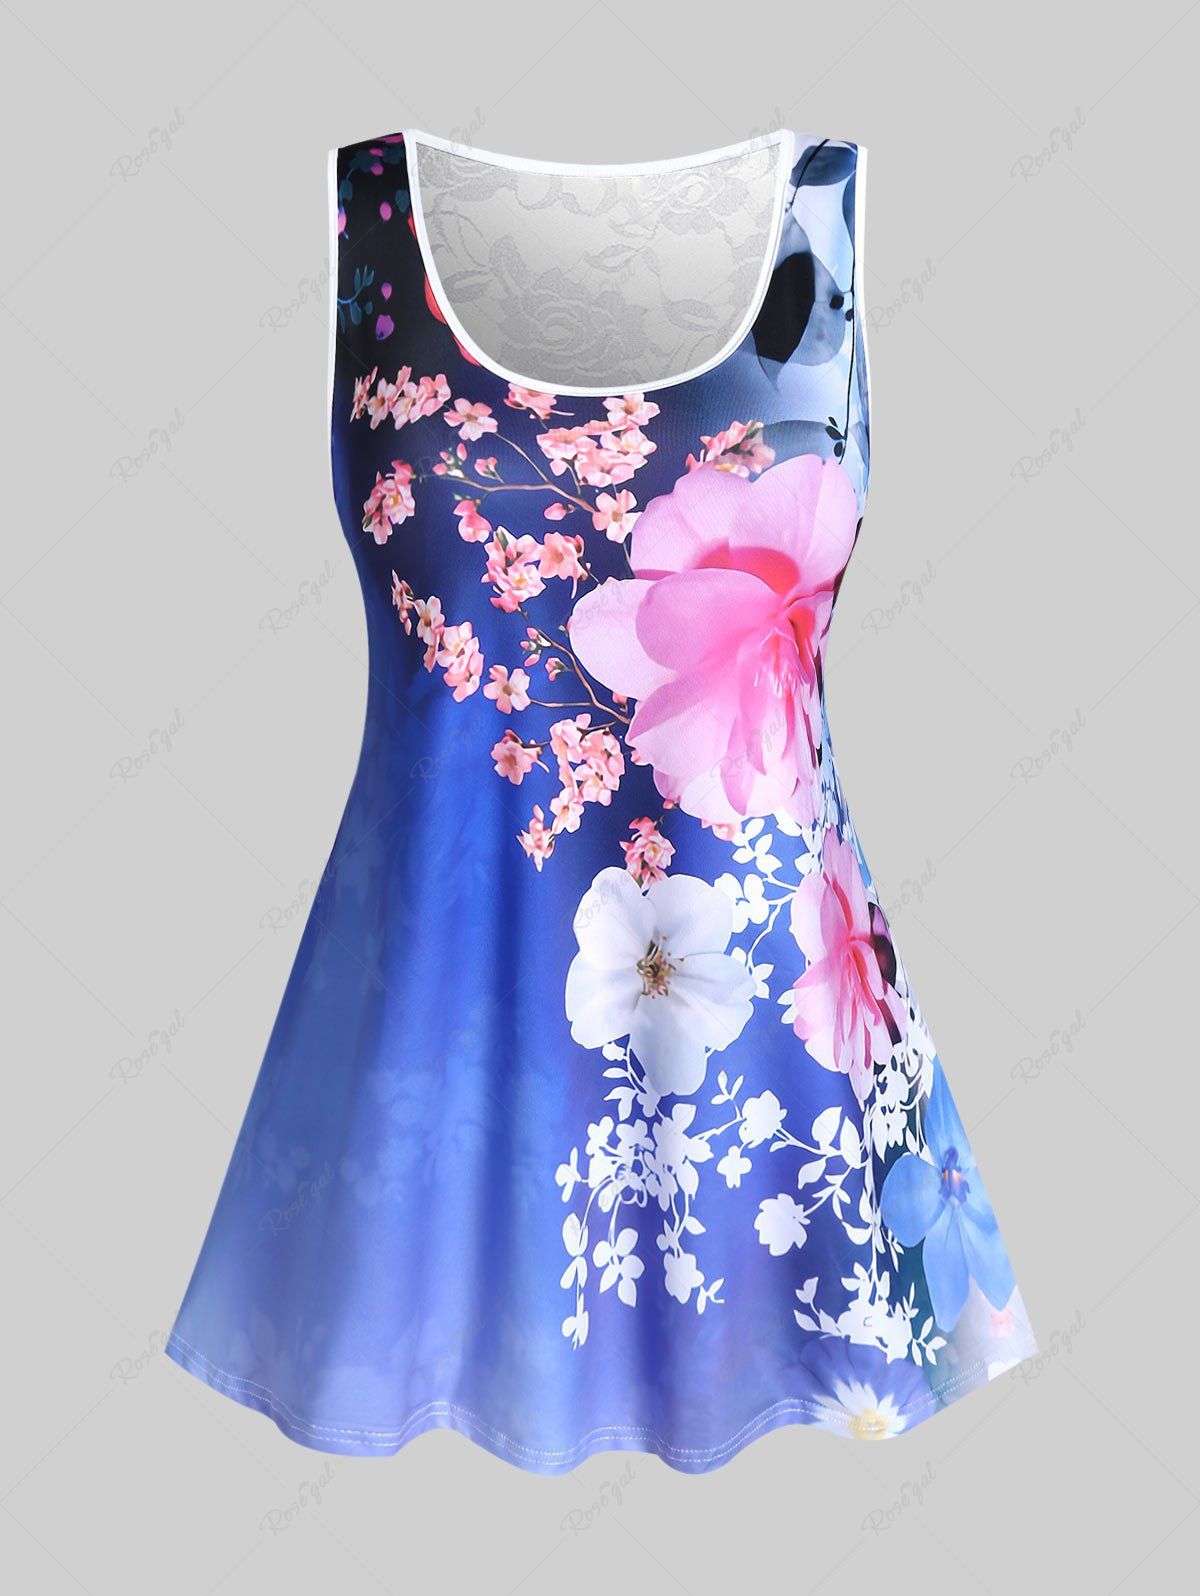 Affordable Plus Size 3D Flower Printed Tank Top with Lace Insert  